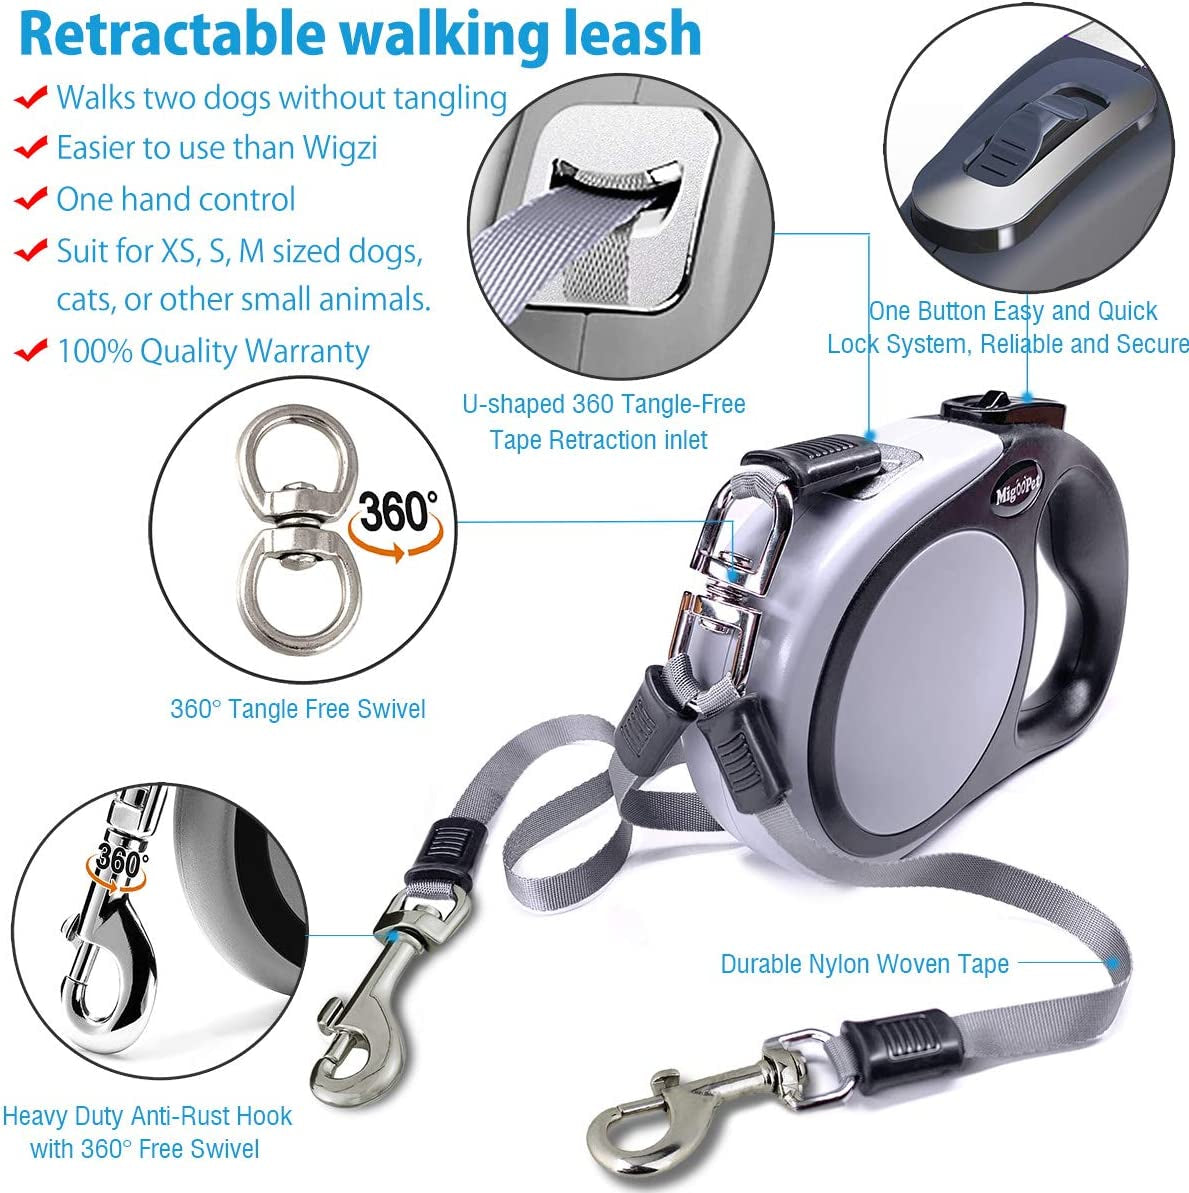 Double Retractable Dog Leash for Two Dogs up to 50 Lbs per Dog - 16 Ft Coupler Dog Leashes for Small Medium Dogs - One Locked System, Non Slip Grip, Tangle Free